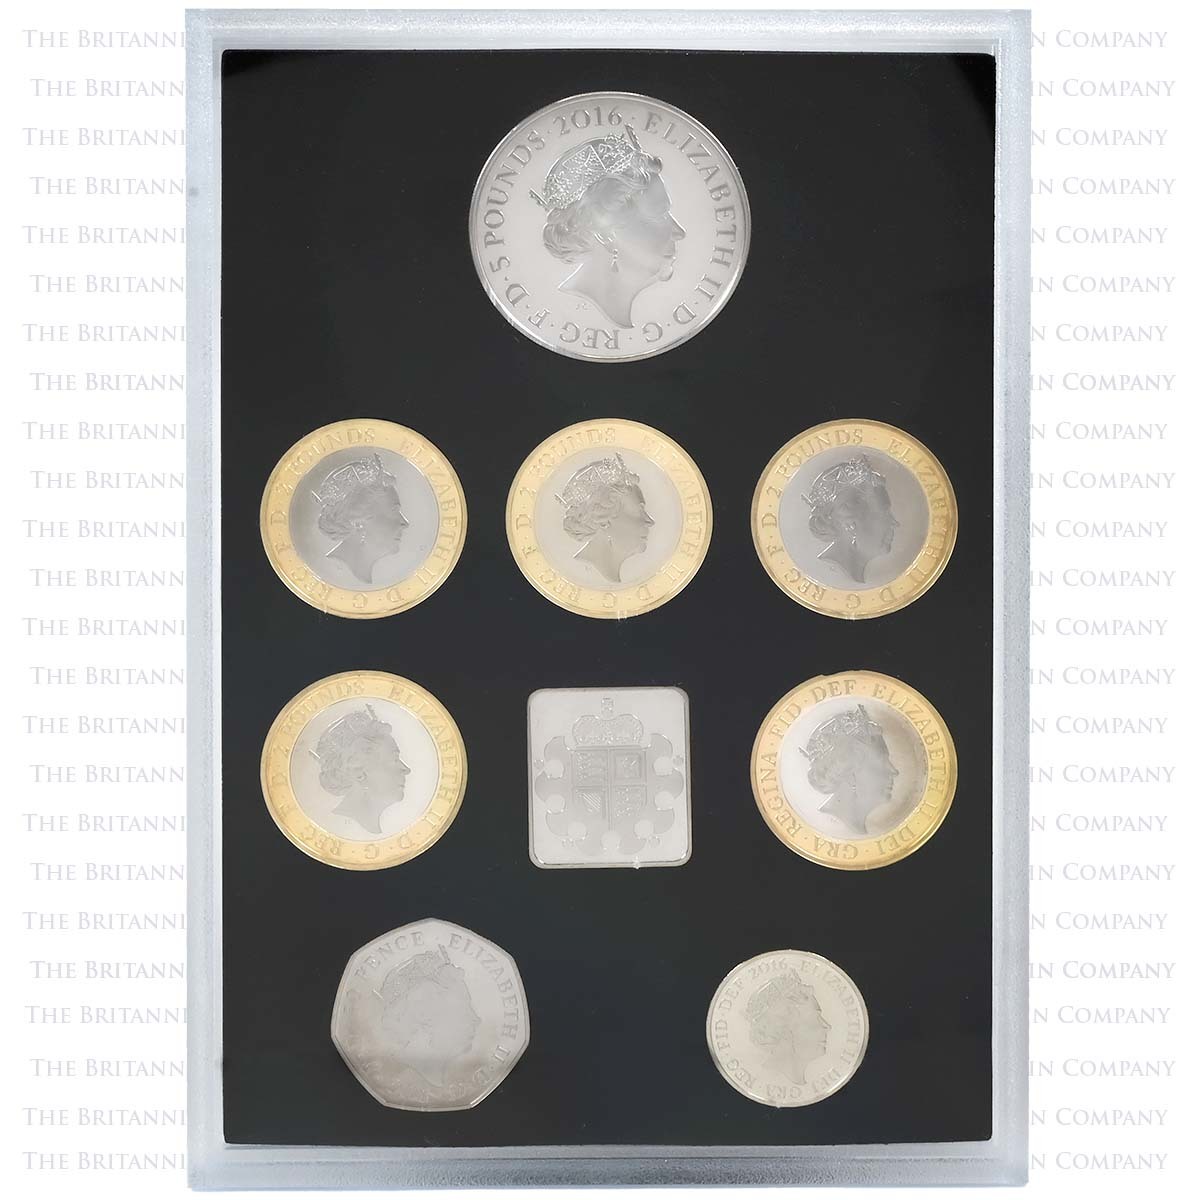 2016-proof-coin-set-collector-edtition-003-m